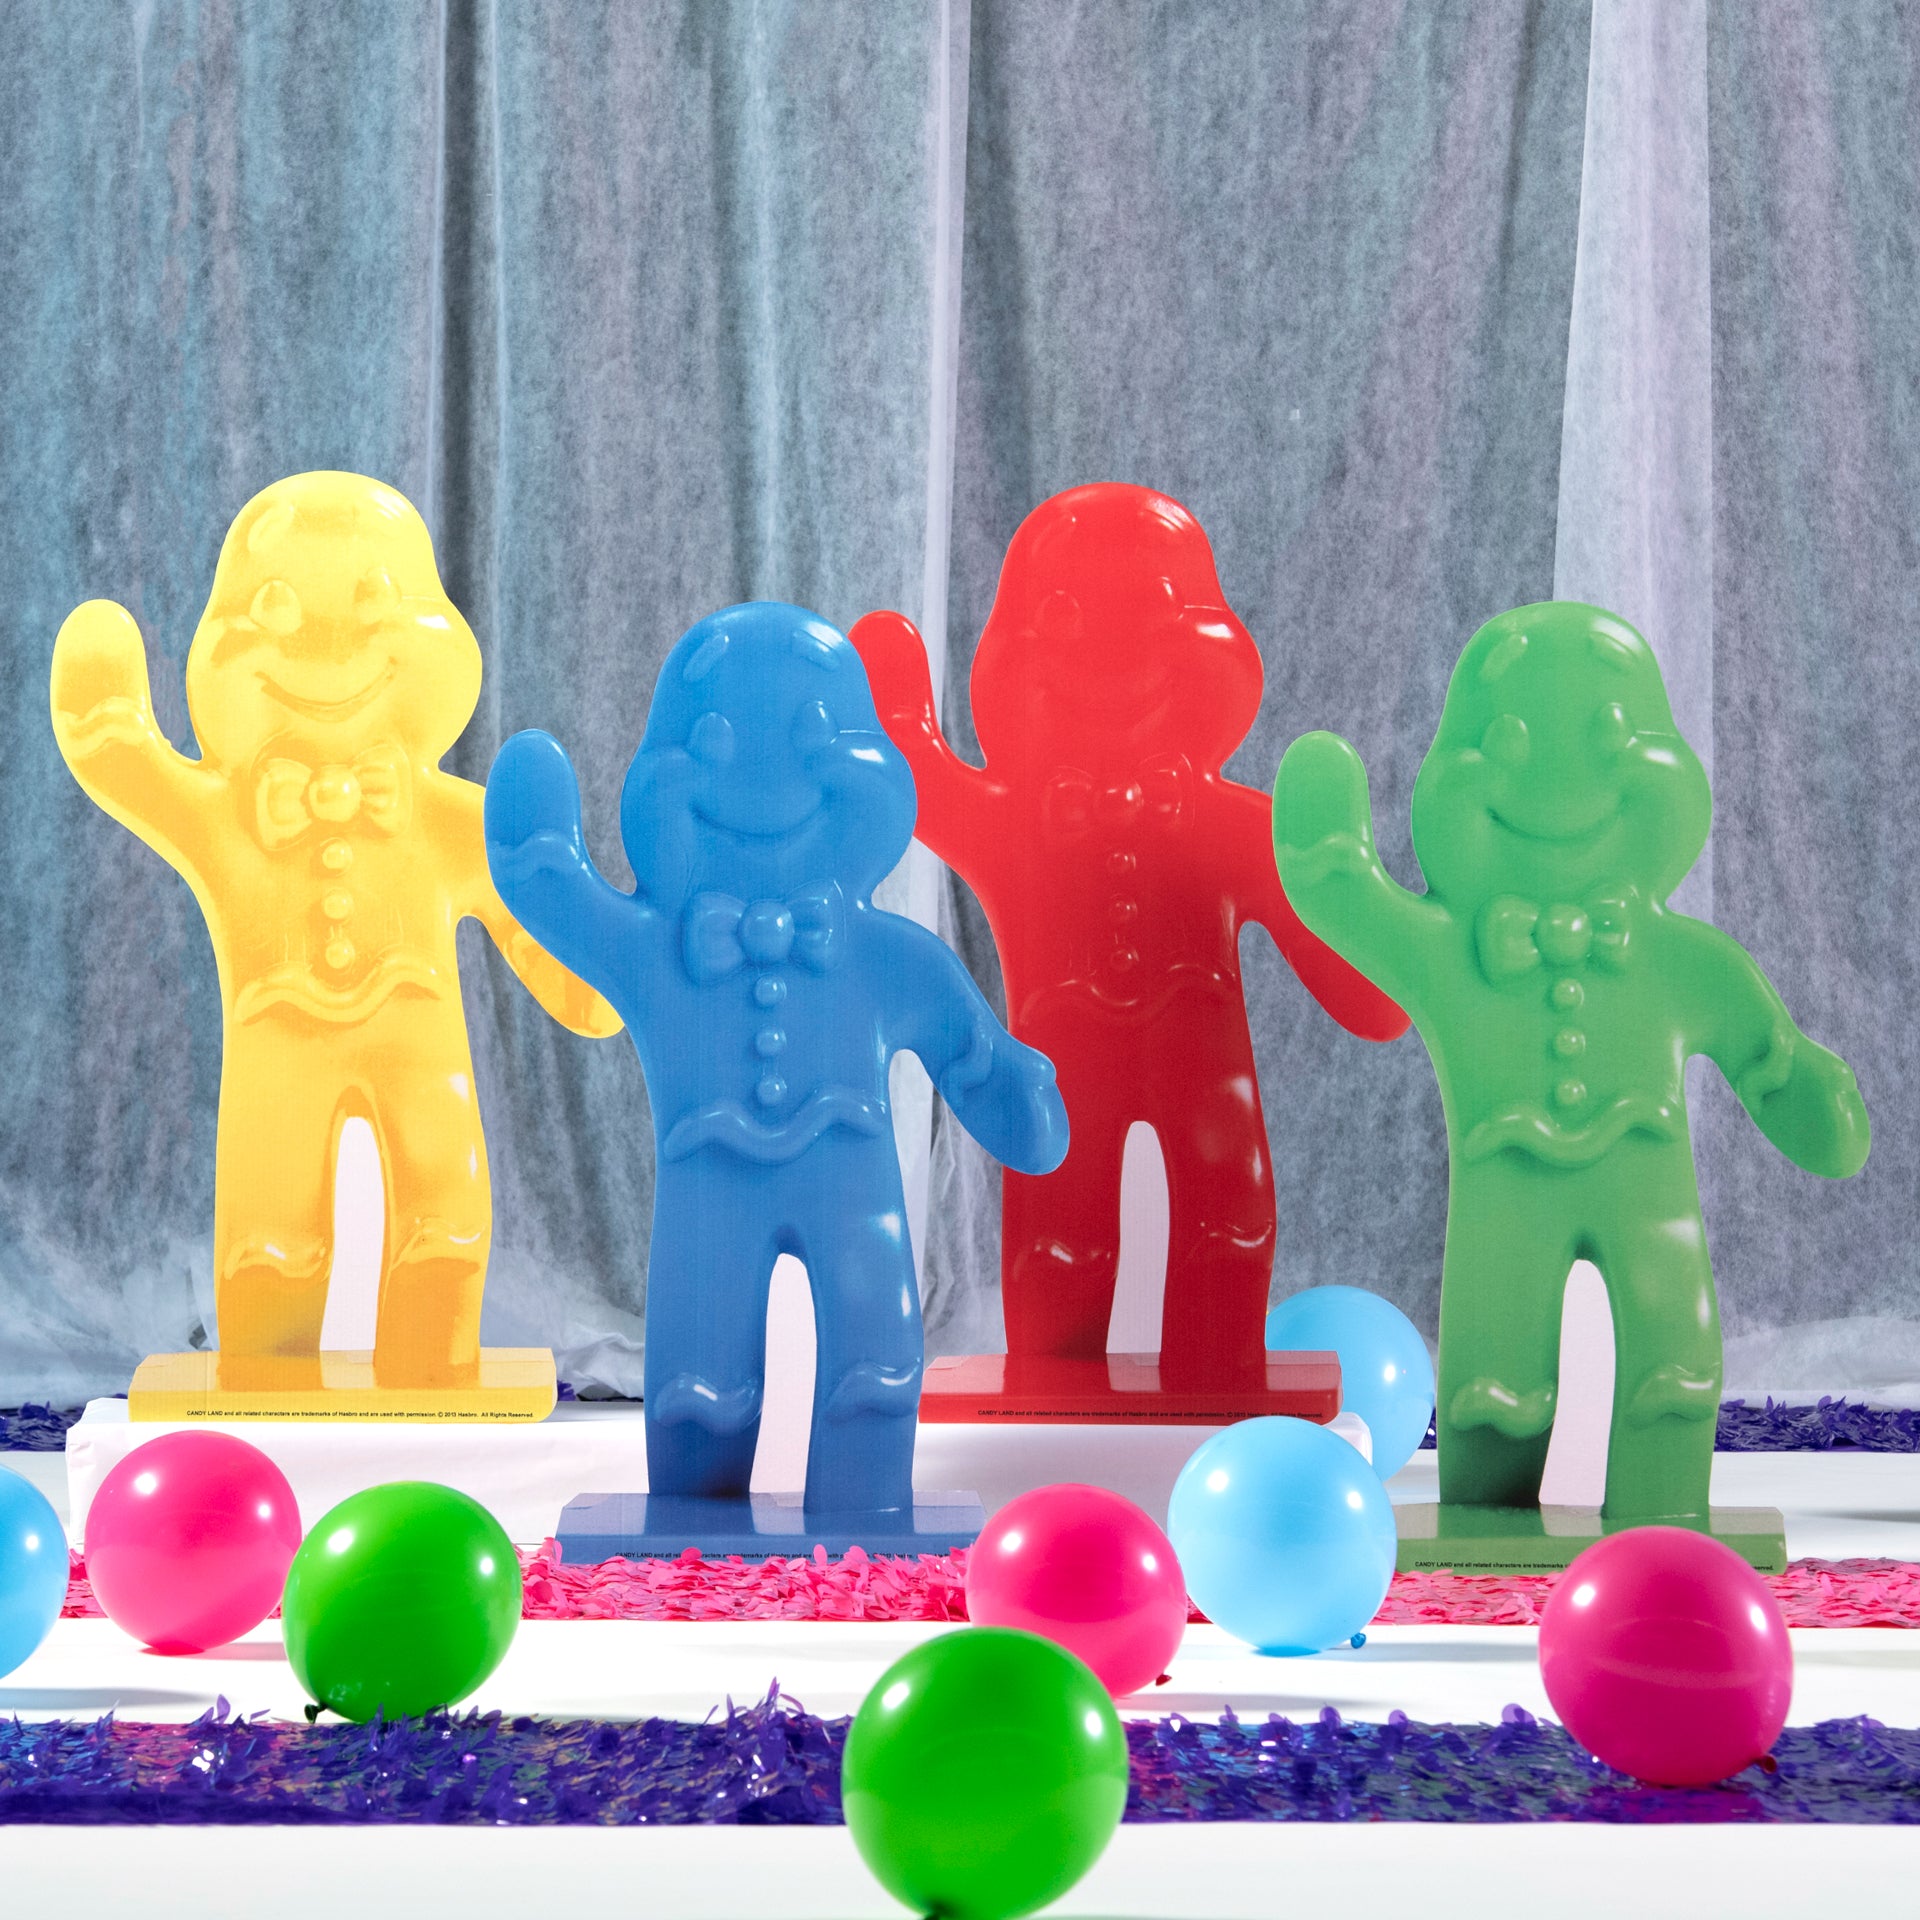 candyland characters gingerbread people